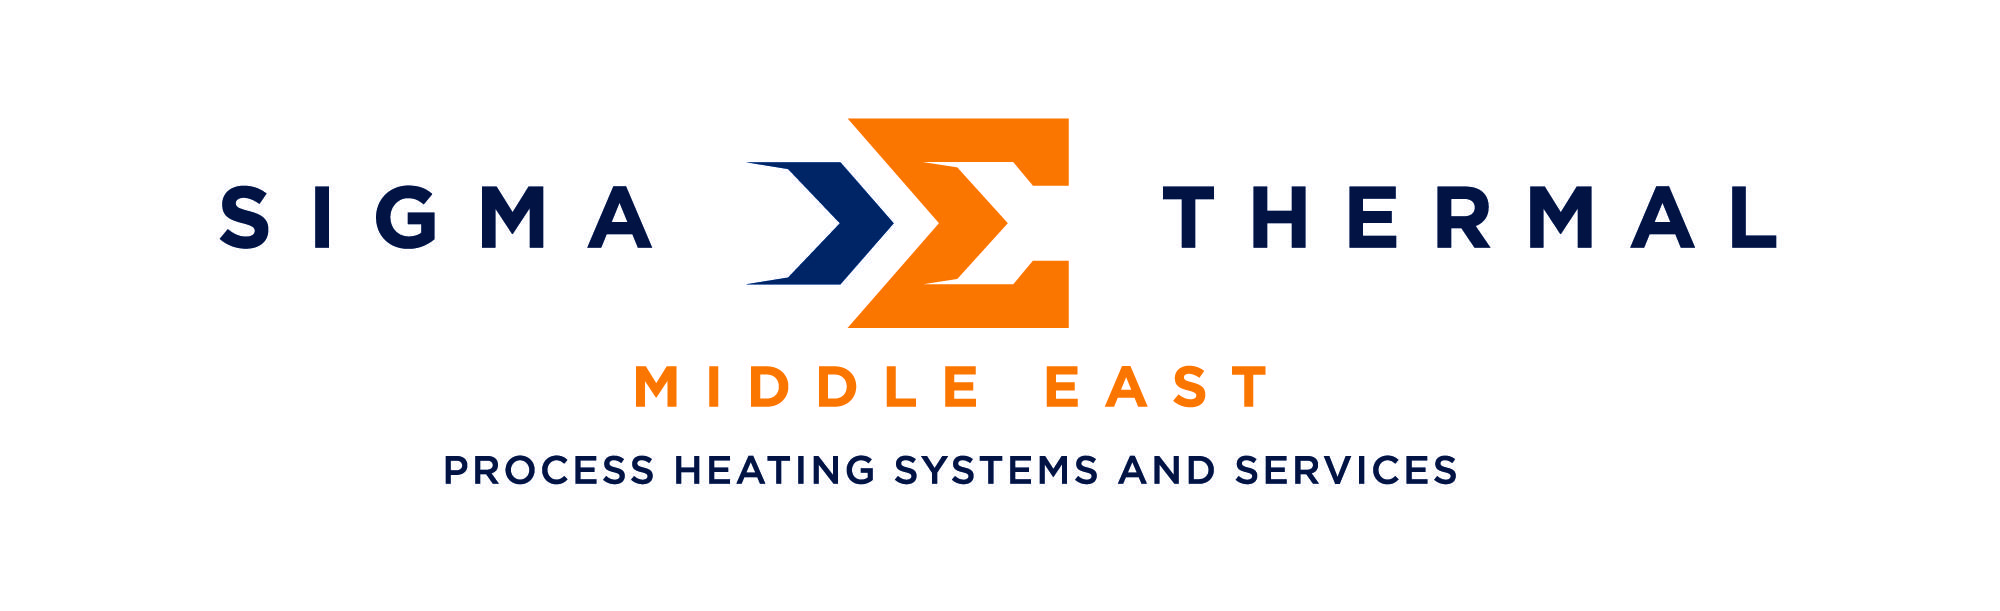 Thermal Logo - Flaretec Merges with Sigma Thermal, Inc. to Expand Middle East